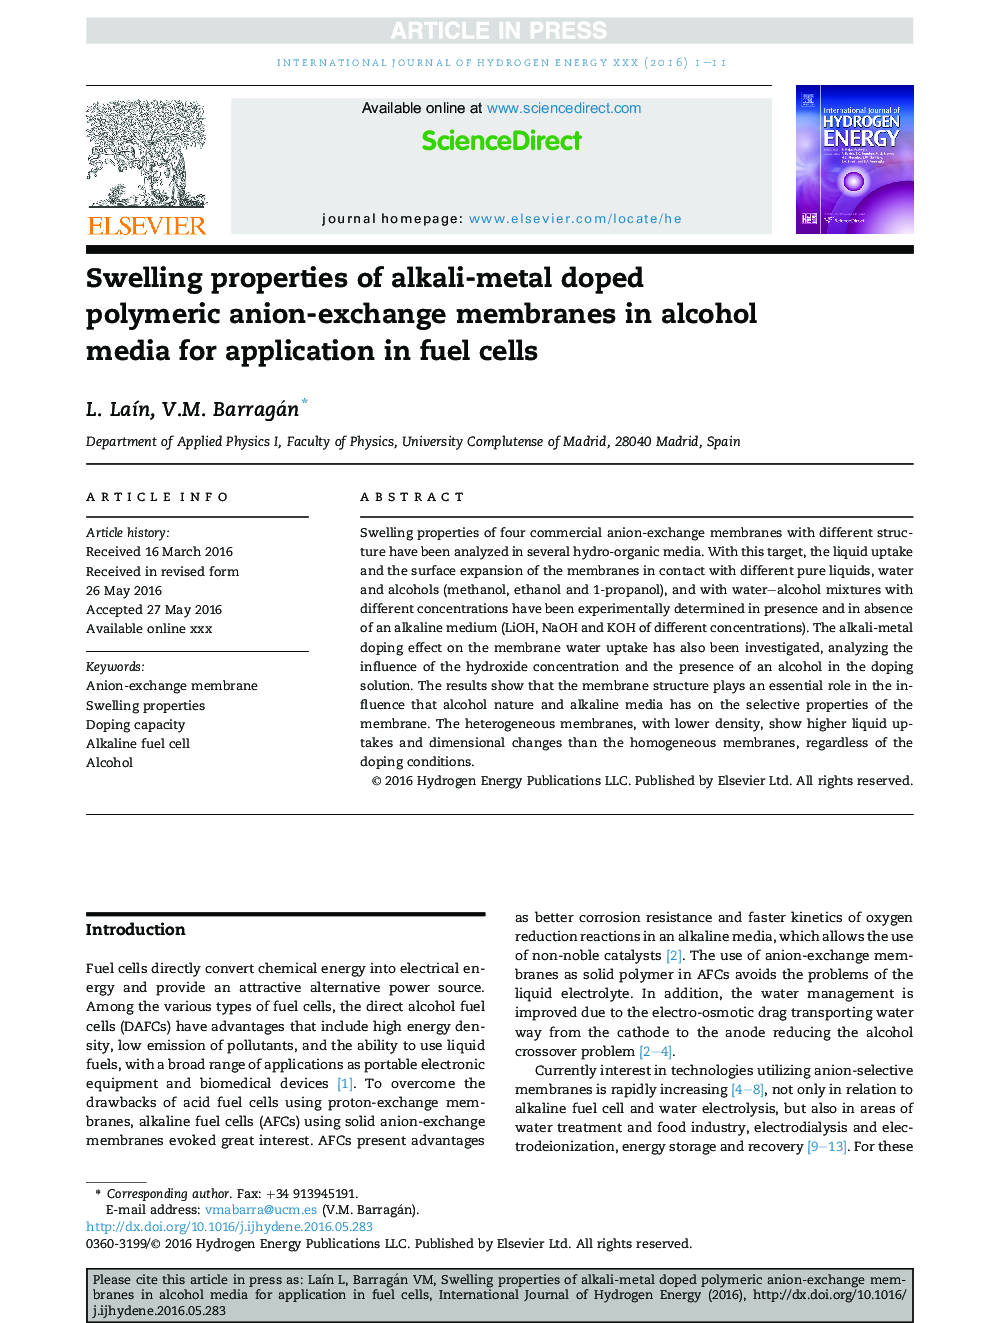 Swelling properties of alkali-metal doped polymeric anion-exchange membranes in alcohol media for application in fuel cells